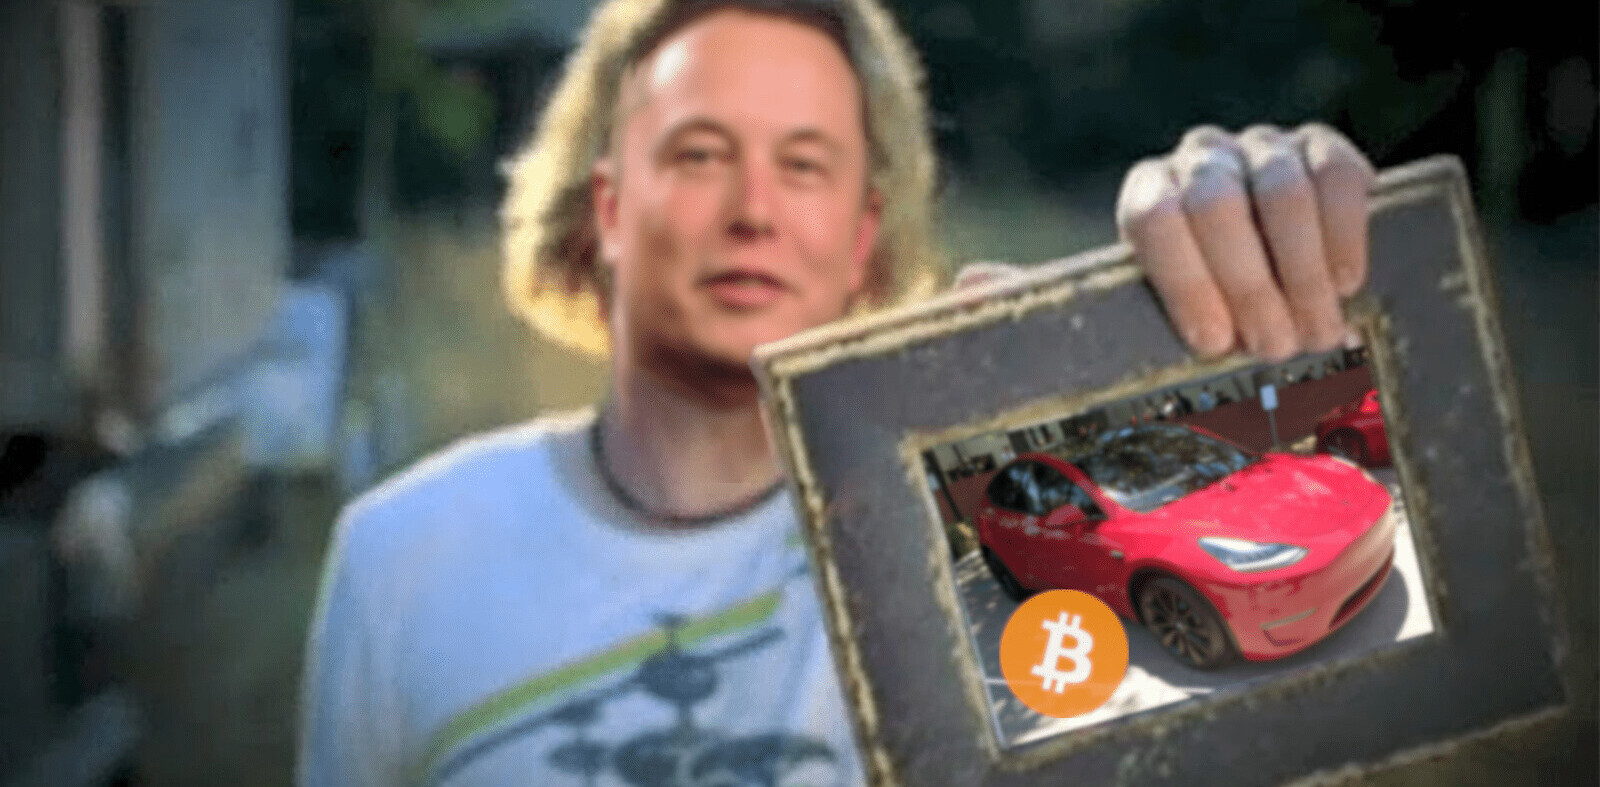 Bitcoin rises to nearly $32,000 as Musk says Tesla will ‘likely’ accept it again